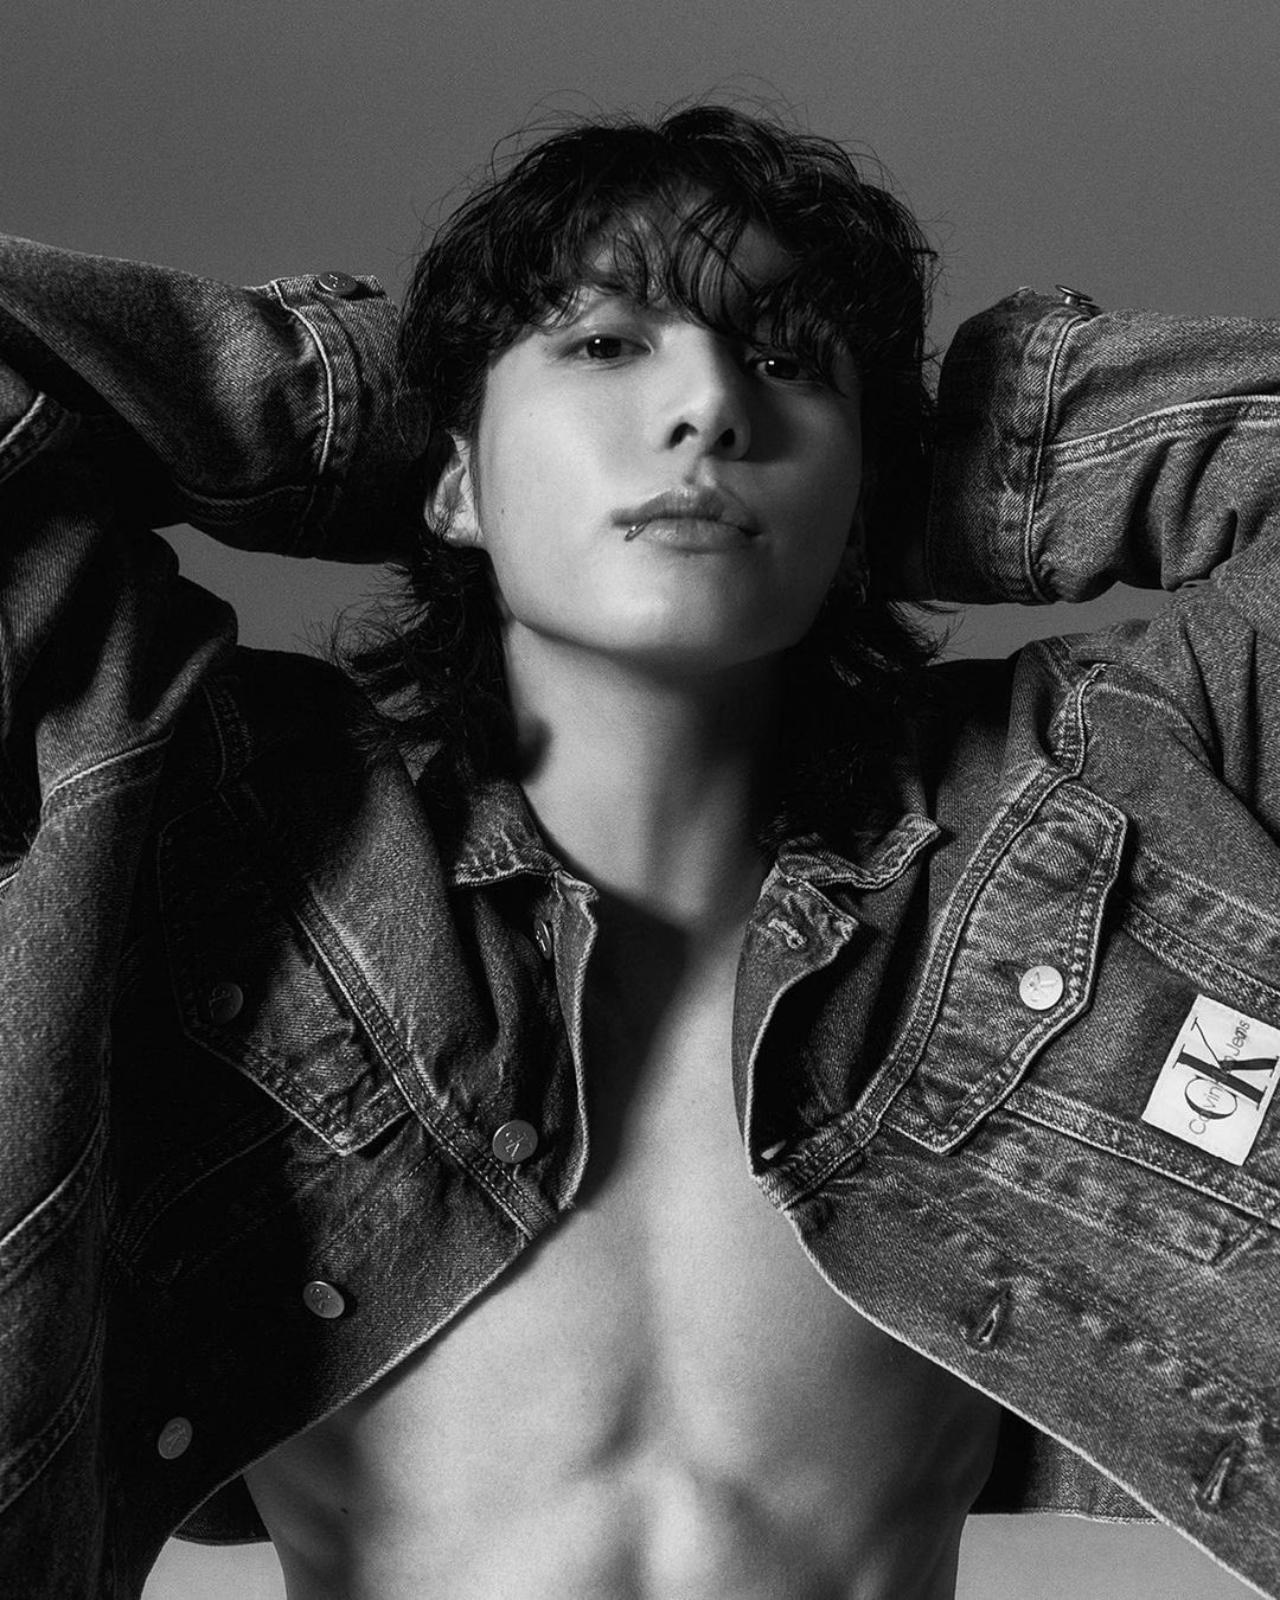 Whew, it's getting real hot in here! Jungkook has no inhibitions sporting his rock-hard abs along with his impeccable fashion sense. Denim and a toned physique makes him a look like a classic American hero! Perhaps, we should consider taking fitness as well as style inspiration from the artist